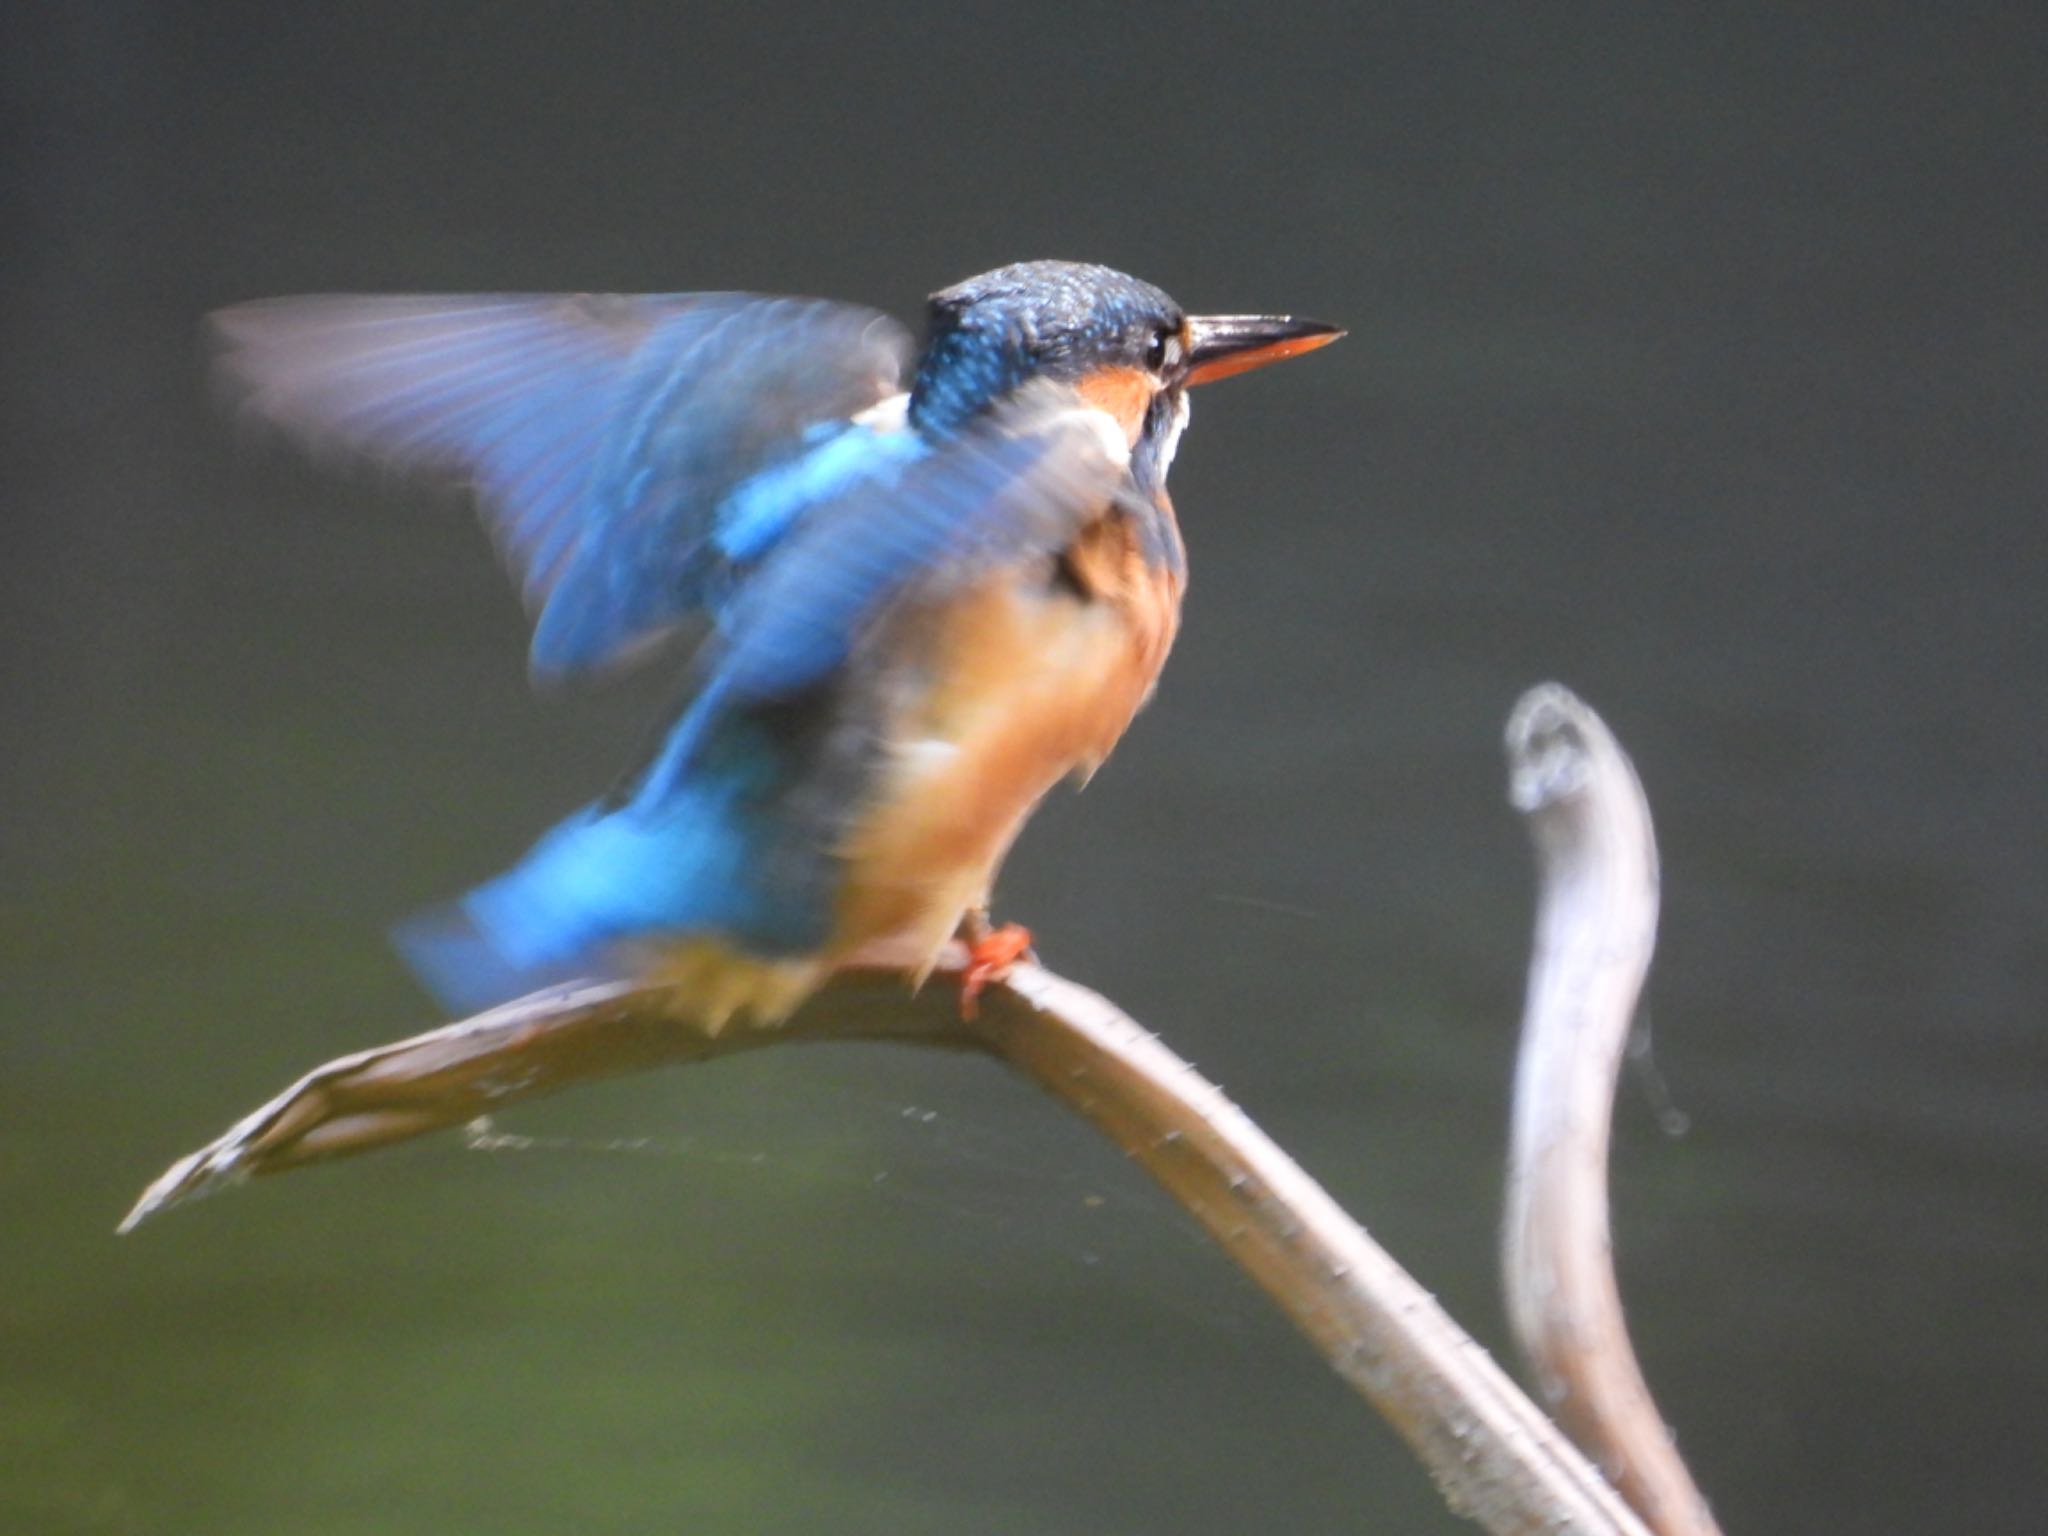 Photo of Common Kingfisher at じゅん菜池公園 by yuco